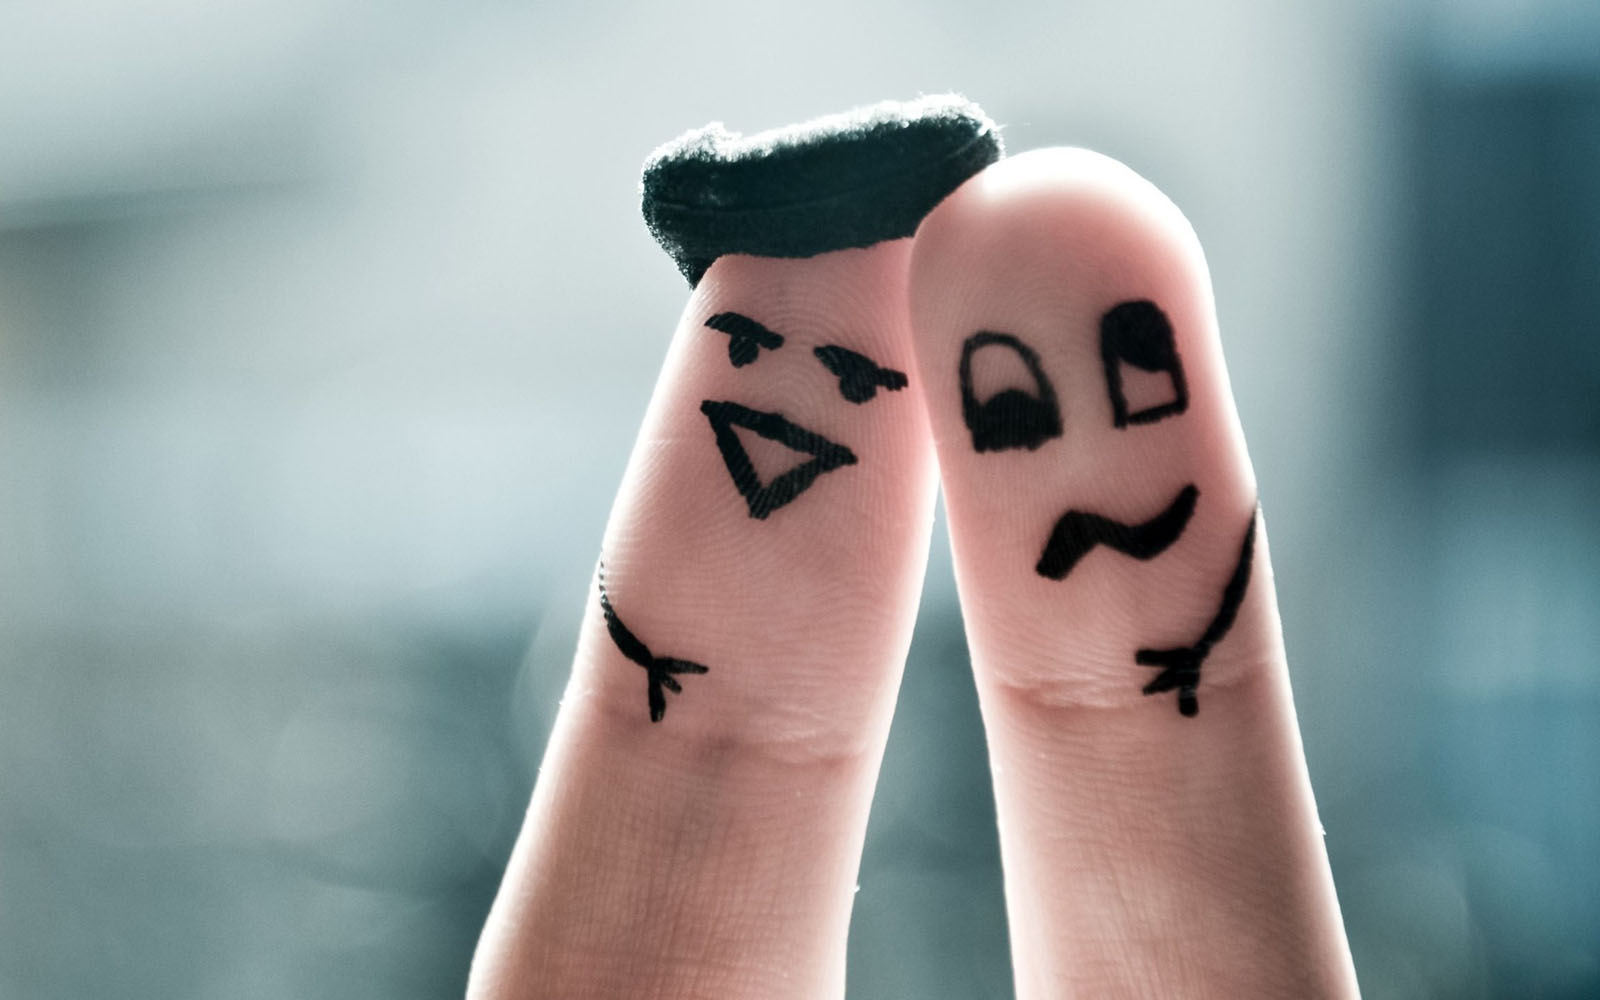 Tag Funny Finger Faces Wallpaper Background Photos Image And